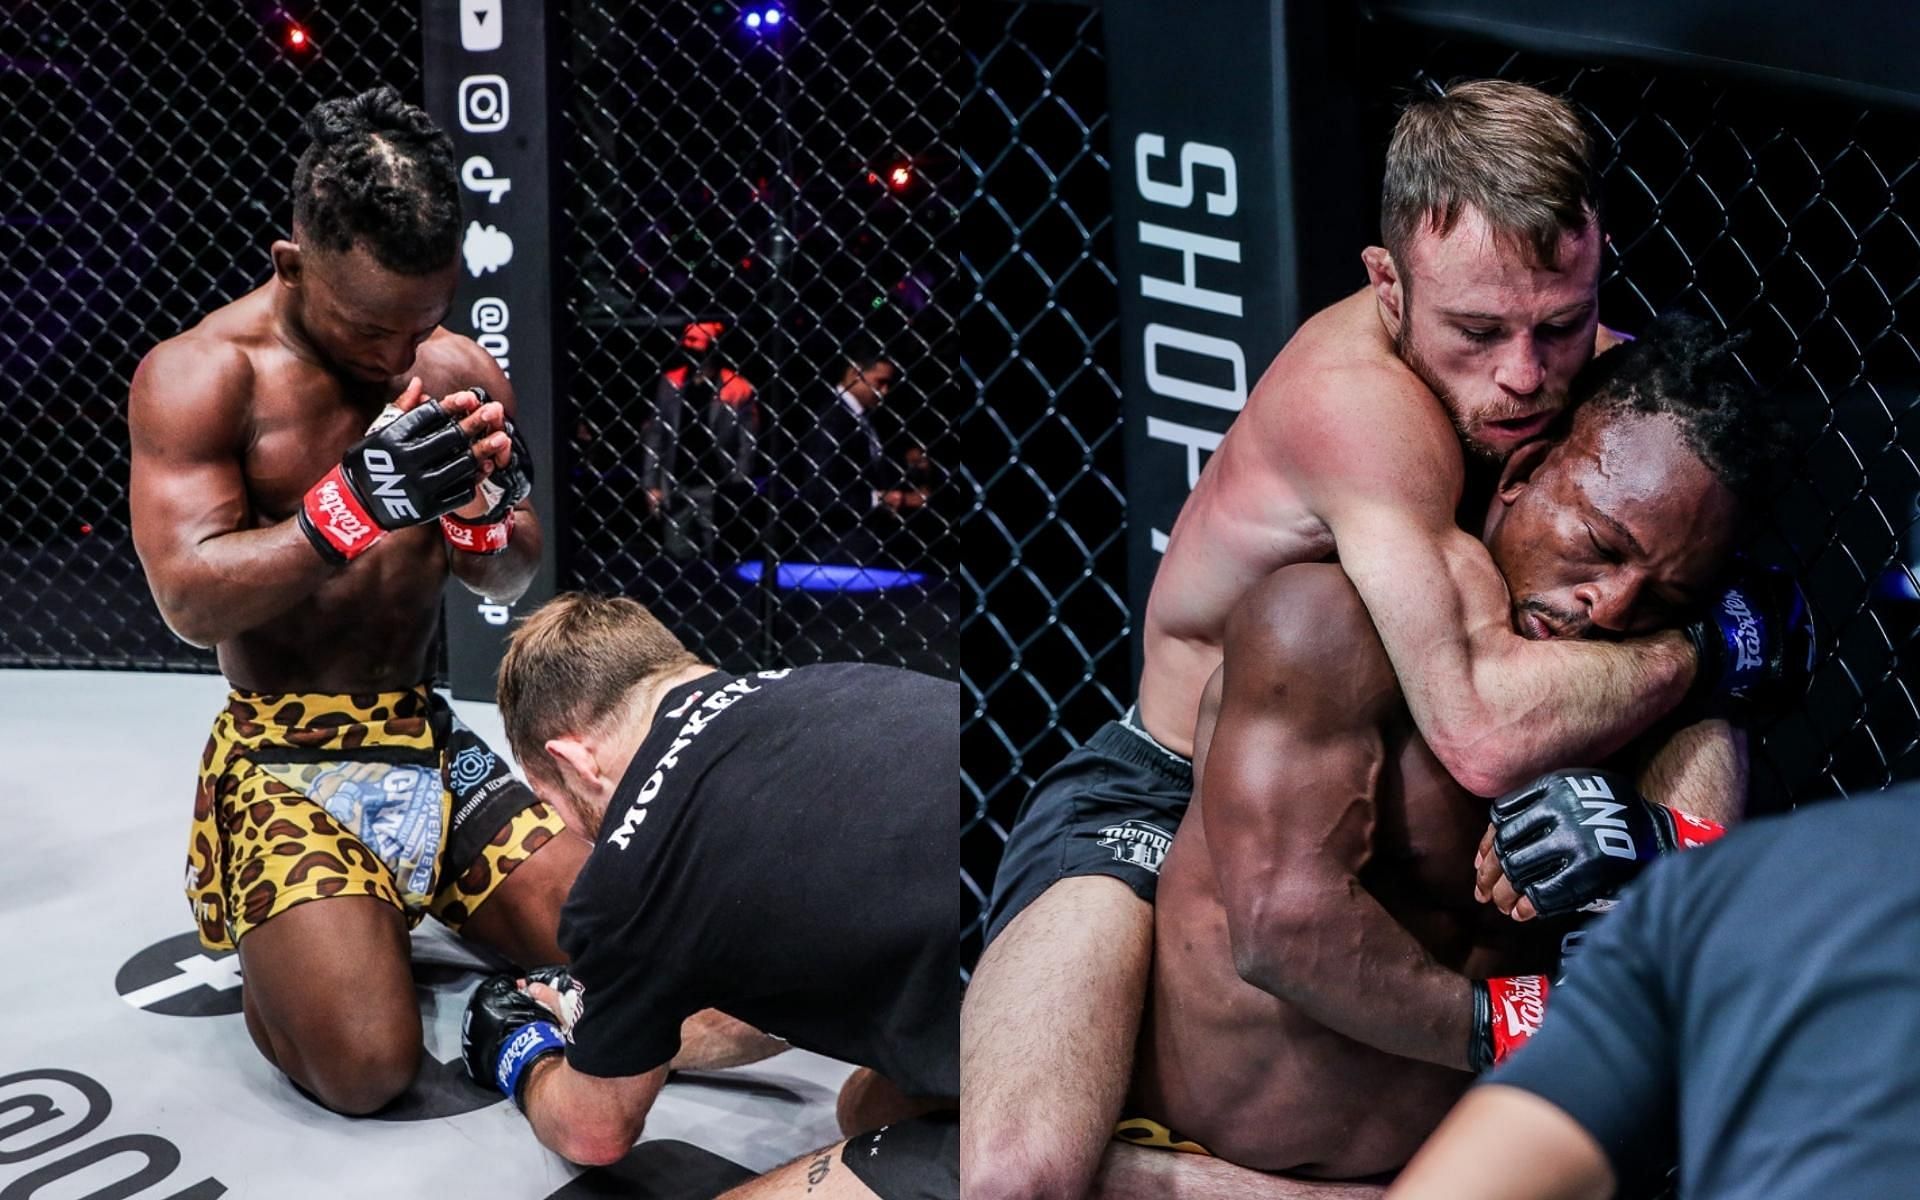 Bokang Masunyane (left) suffered his first MMA loss to Jarred Brooks (right) at ONE 156. (Images courtesy of ONE Championship)